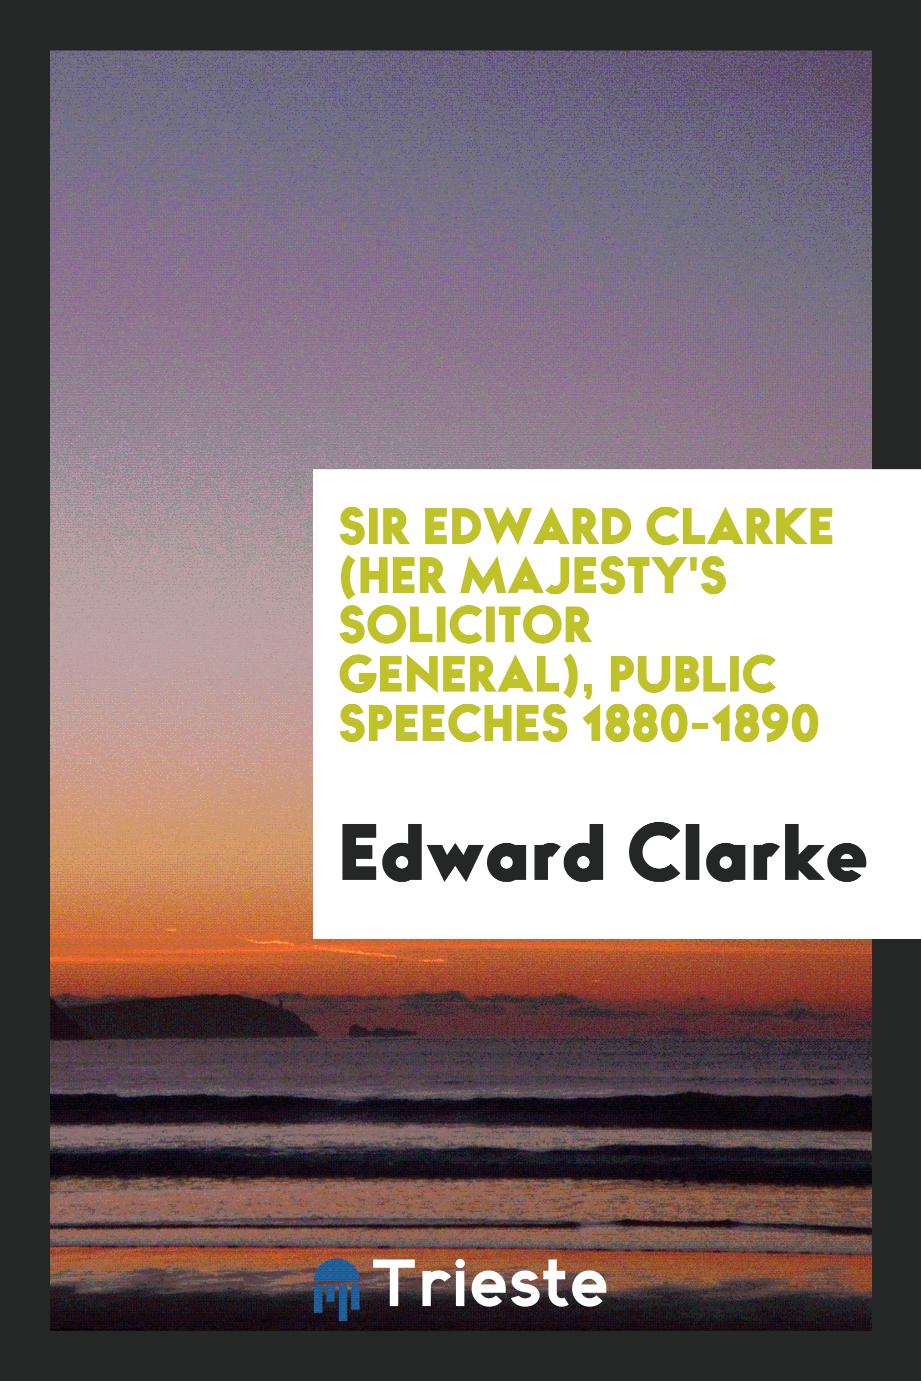 Sir Edward Clarke (Her Majesty's solicitor general), public speeches 1880-1890